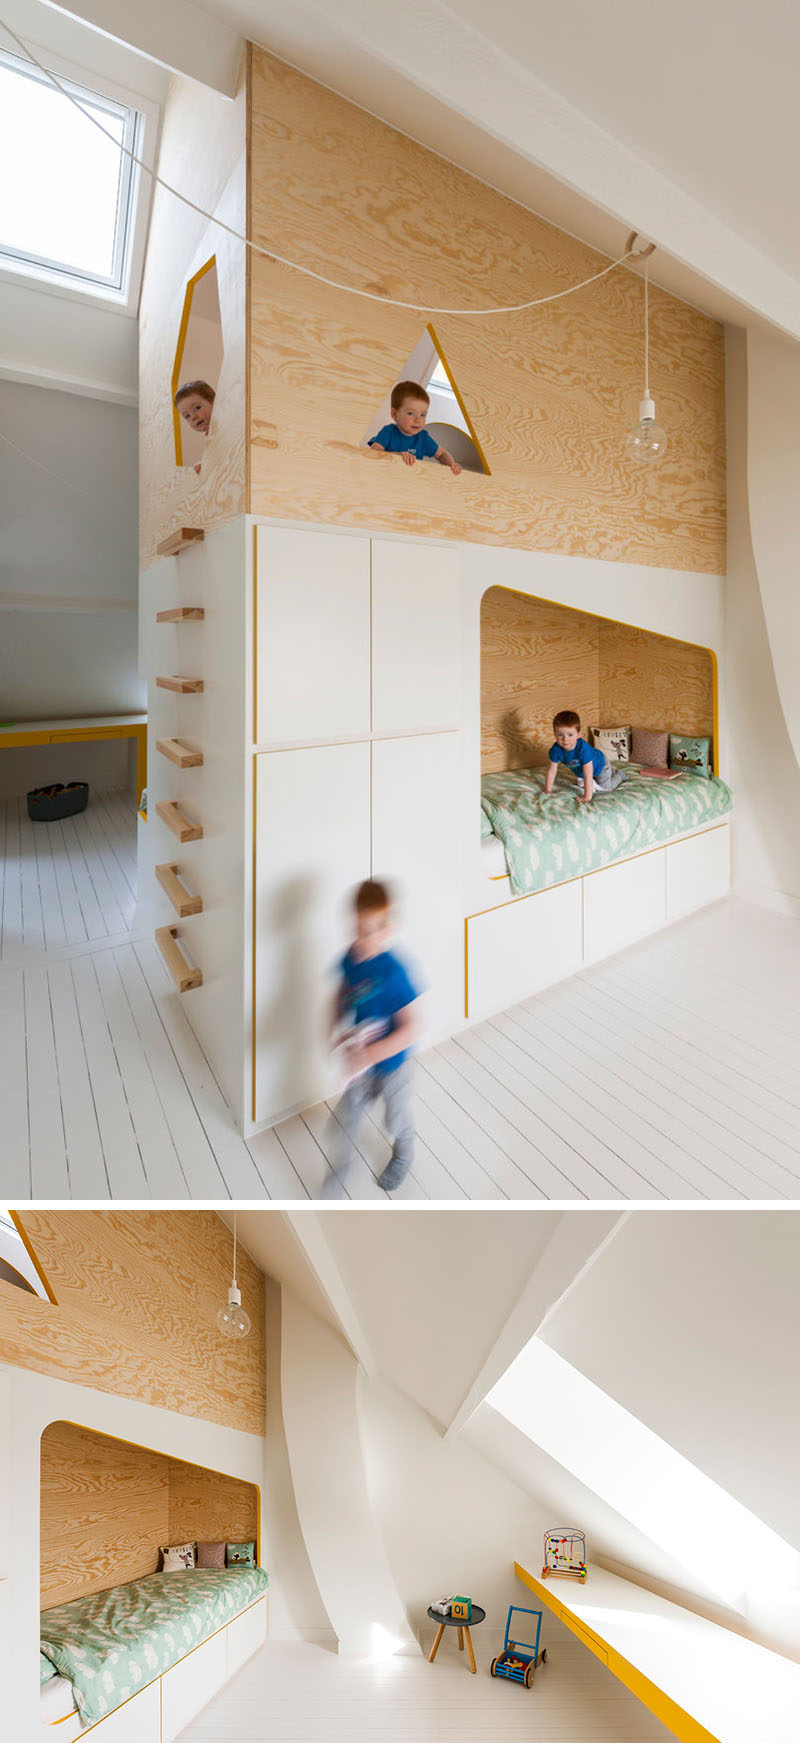 This modern kids bedroom features a custom designed wood bunk bed, each with their own desk and side of the room, and a lofted playroom.